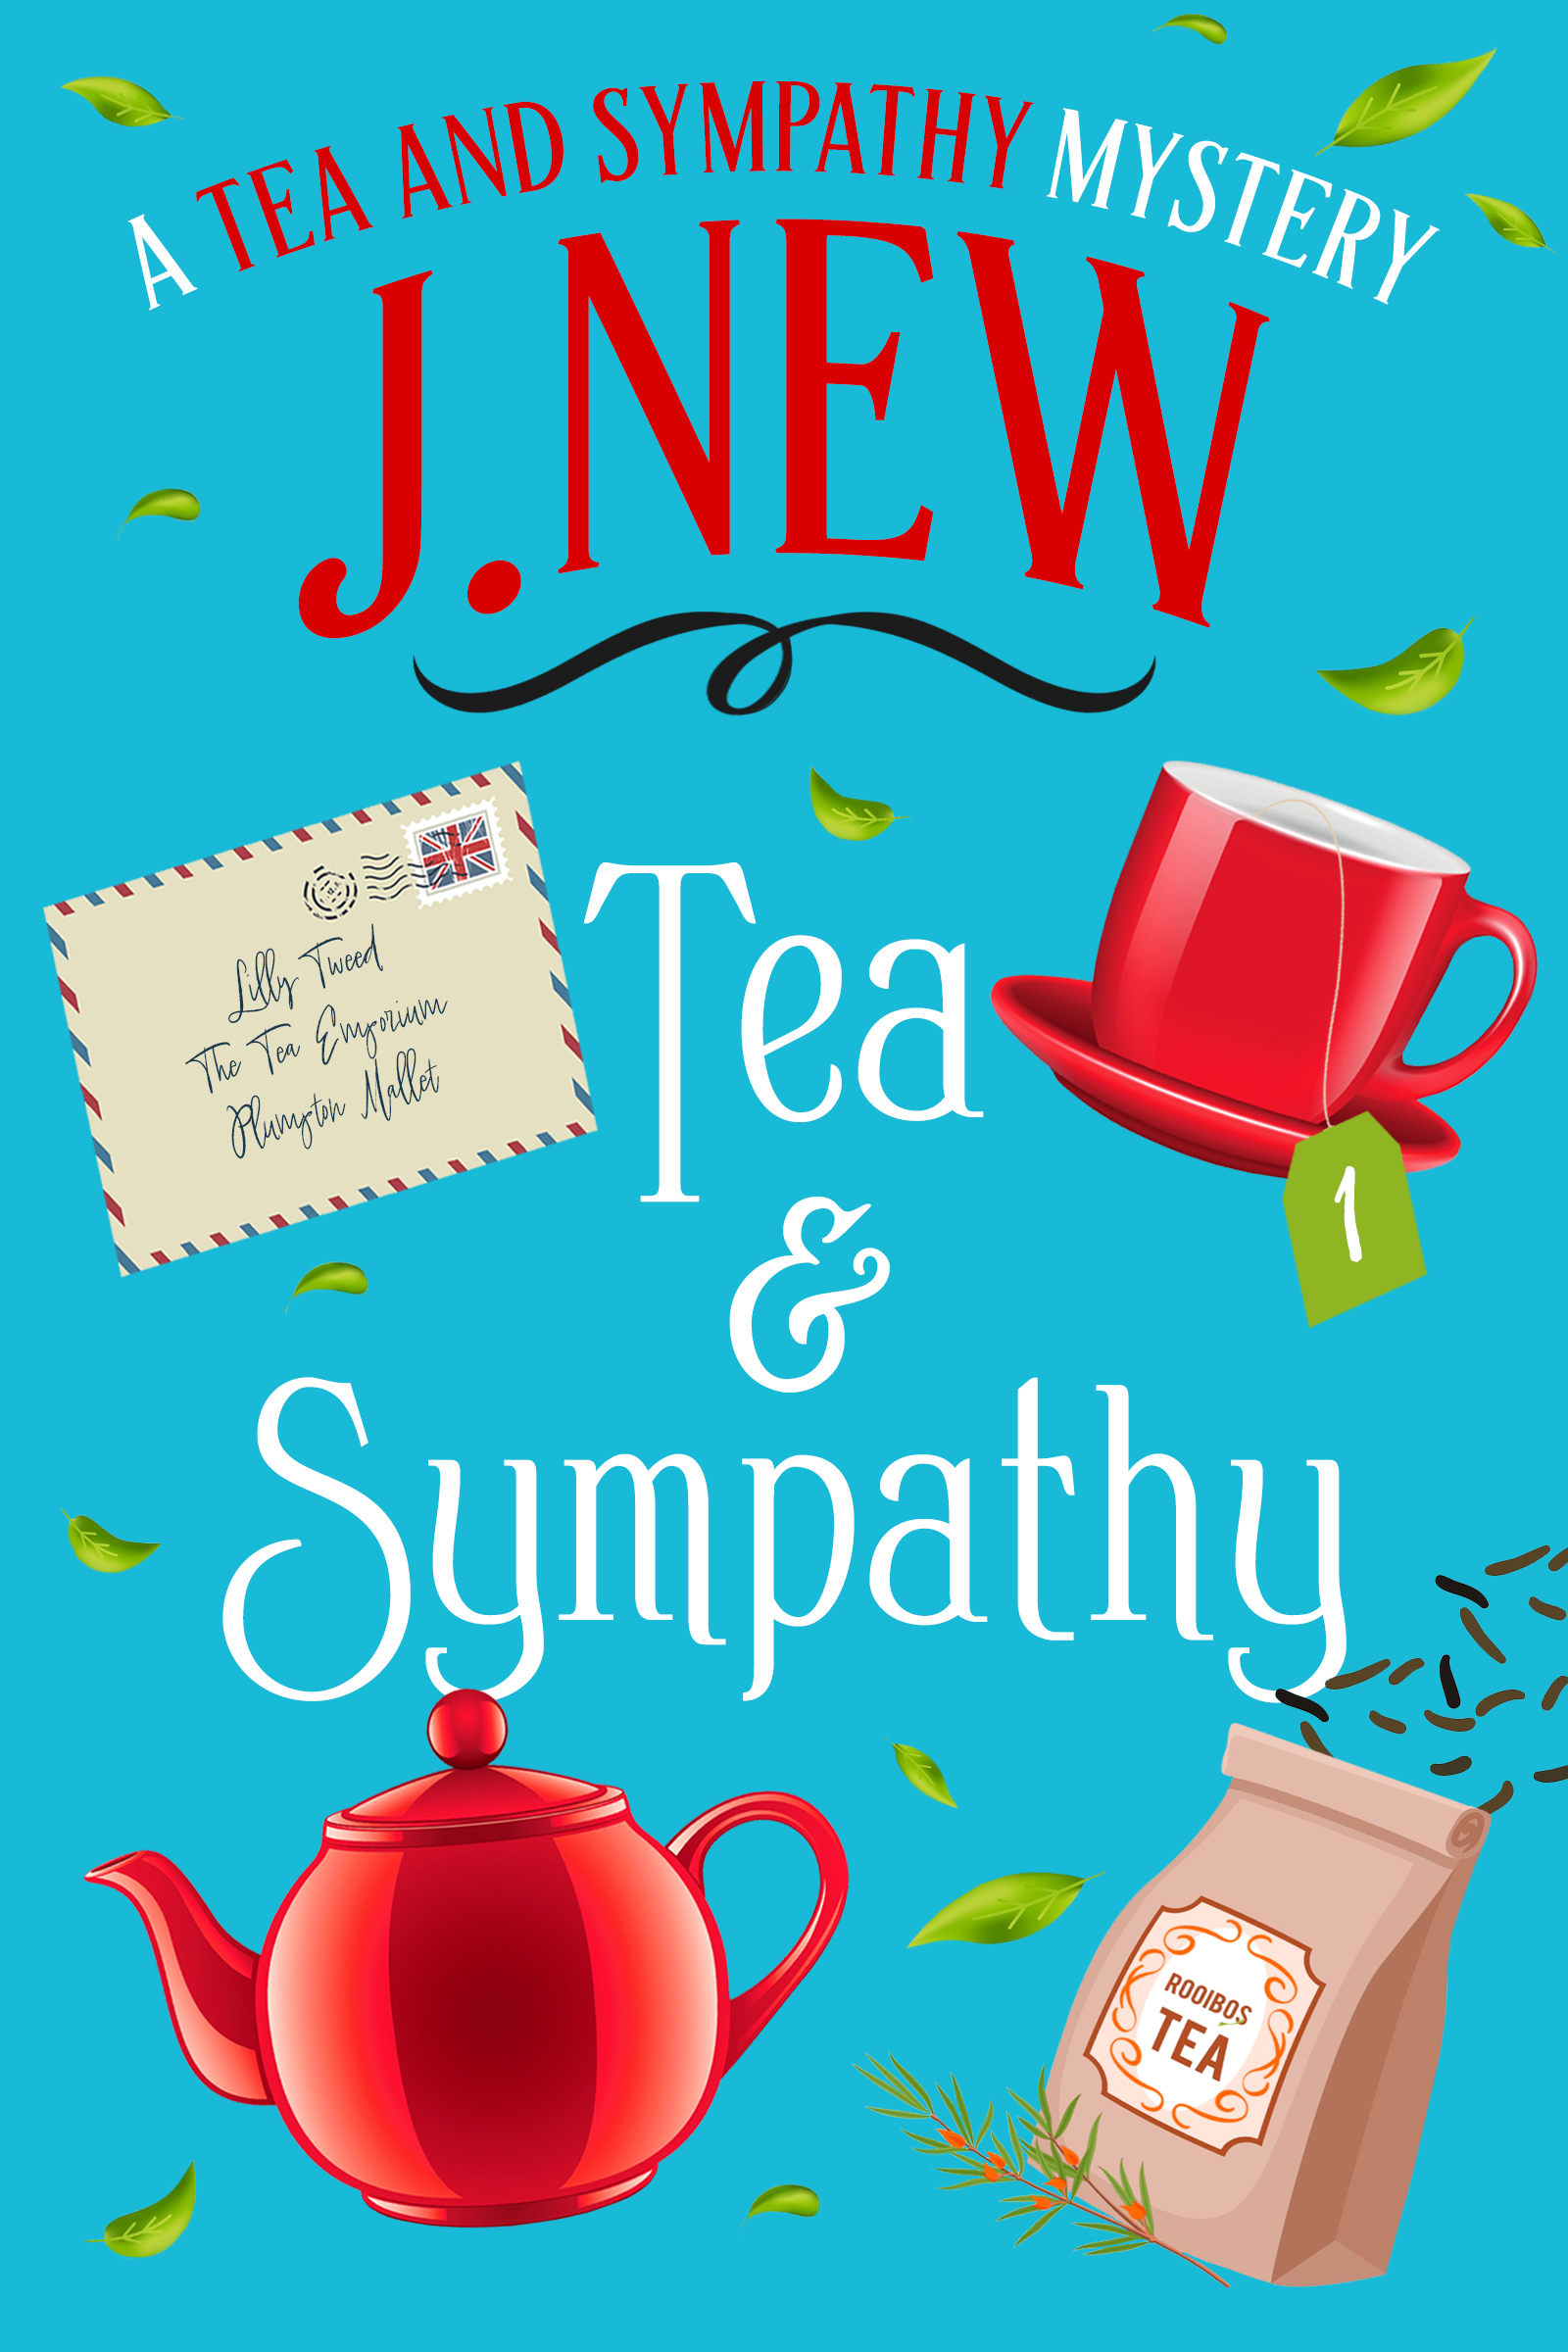 Tea and Synpathy, the first book in the hugely popular British Tea and Sympathy cozy culinary mystery series by Author J. New